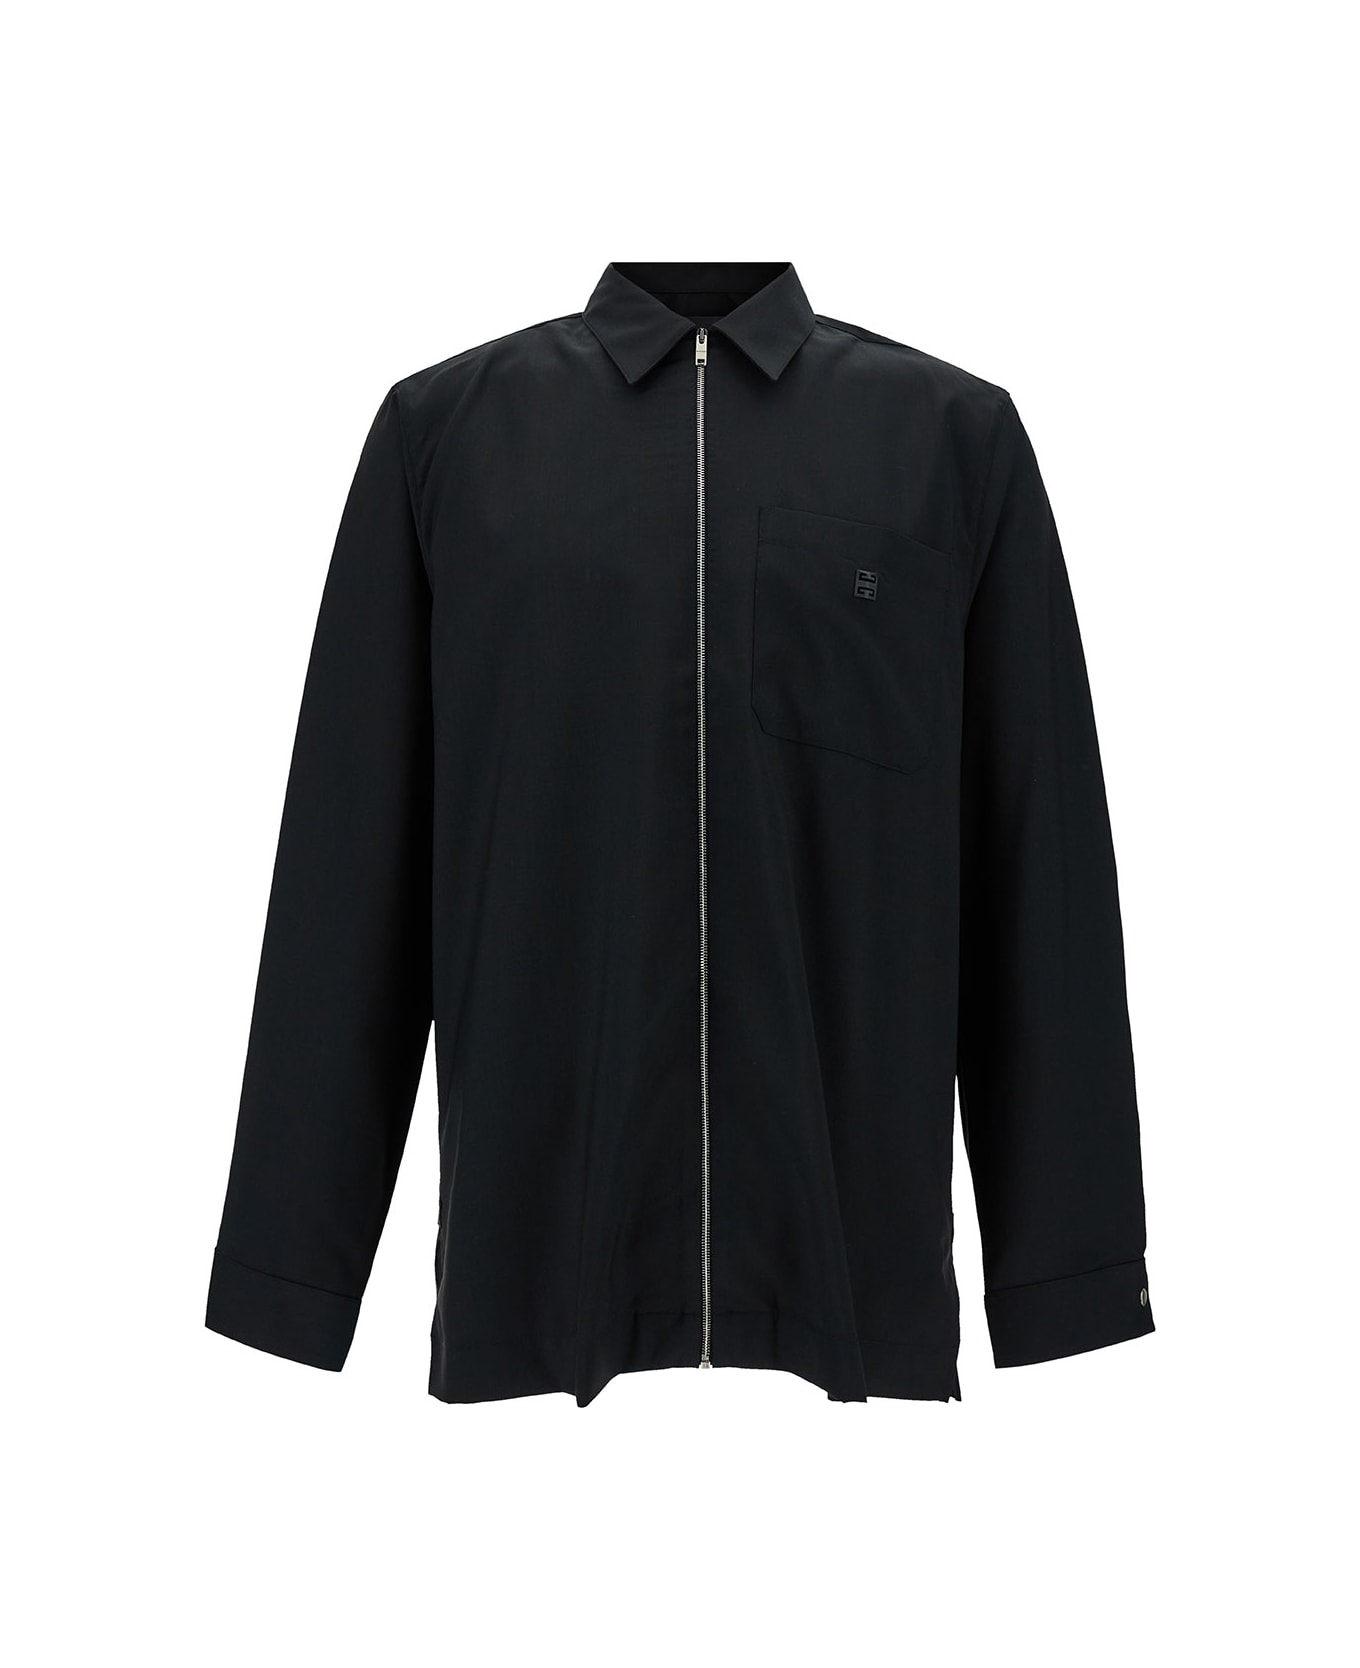 Givenchy Black Shirt With Zip Closure And 4g Logo In Wool Man - Black